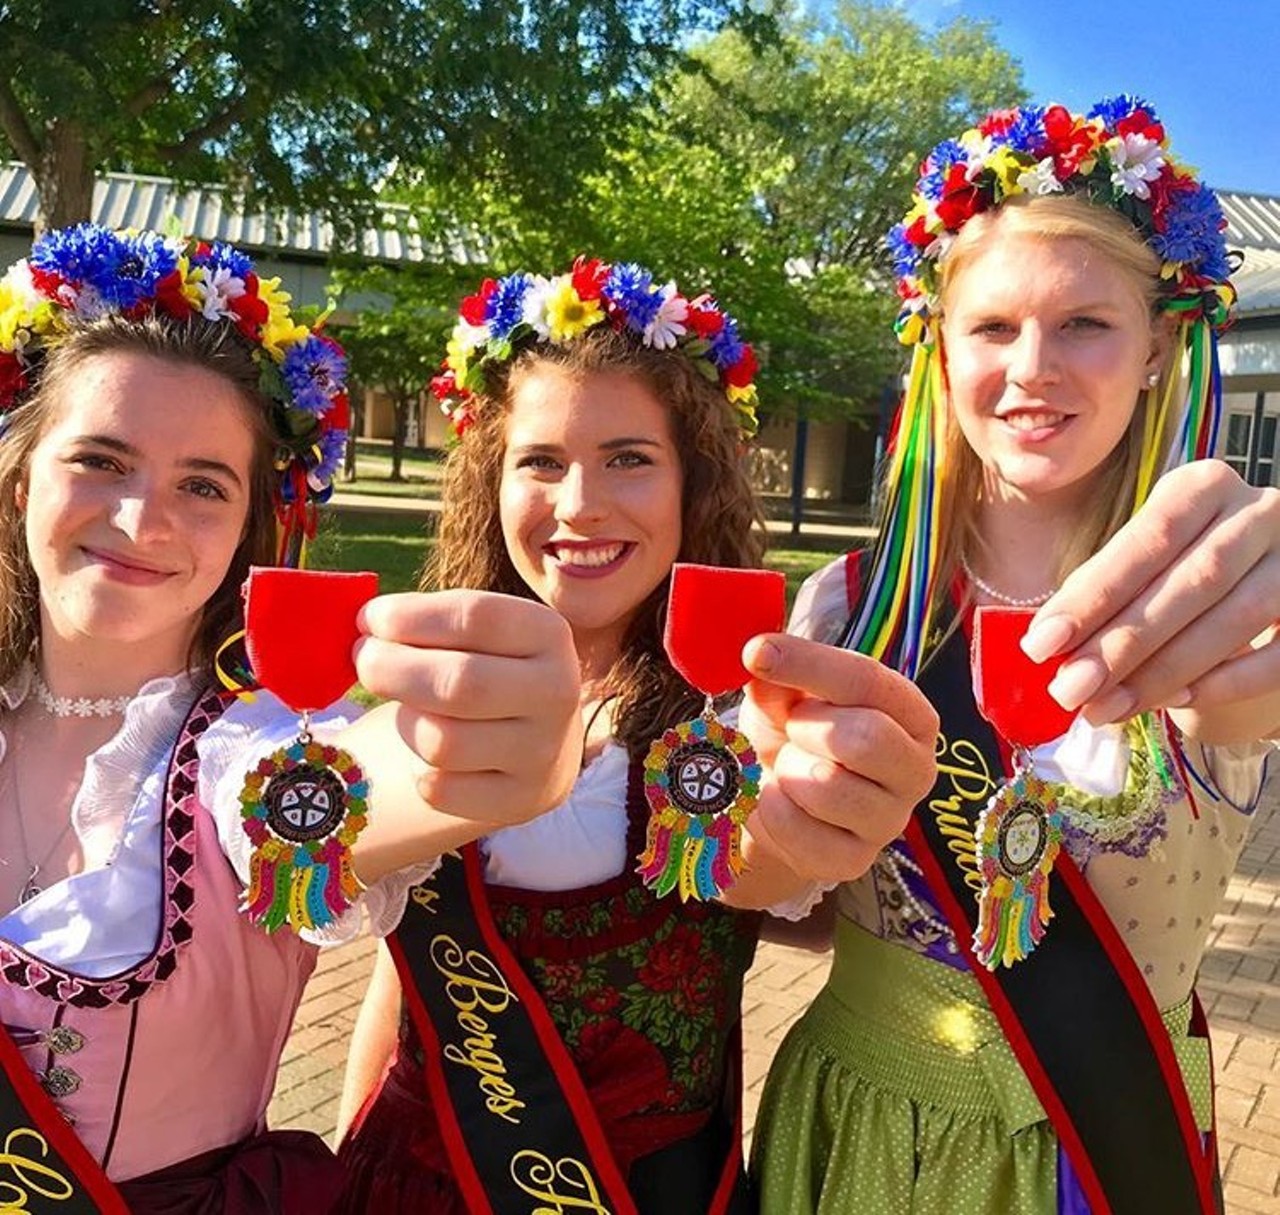 Boerne Berges Fest Cookoff & Auction
Free, Fri Jun 15-17, Kendall County Fairgrounds/Herff Park, 1307 River Rd, Boerne, bergesfest.com
This festival is a three-day celebration of Germanic culture through food, parades and tournaments. The event even has a dachshund race!
Photo via Instagram / boernebergesfest